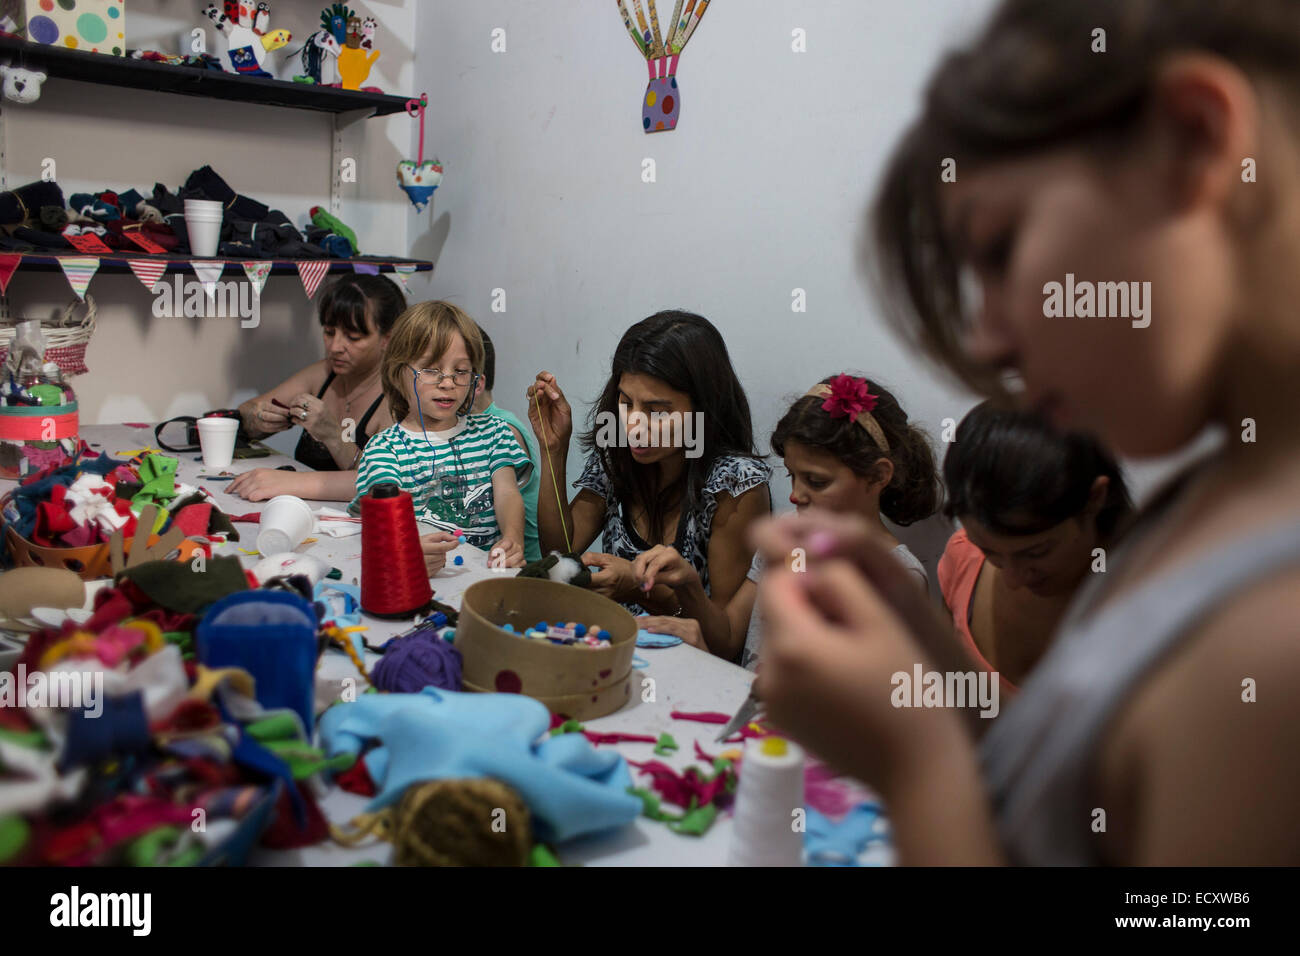 Buenos Aires, Argentina. 21st Dec, 2014. Volunteers create hand puppets that will be donated to children from low-income family in the 'Si' Foundation Toy Factory in Buenos Aires City, capital of Argentina, on Dec. 21, 2014. Up until now, over 5,600 toys created by around 6,000 volunteers have been sent to children in different cities in Argentina, according to local media. © Martin Zabala/Xinhua/Alamy Live News Stock Photo